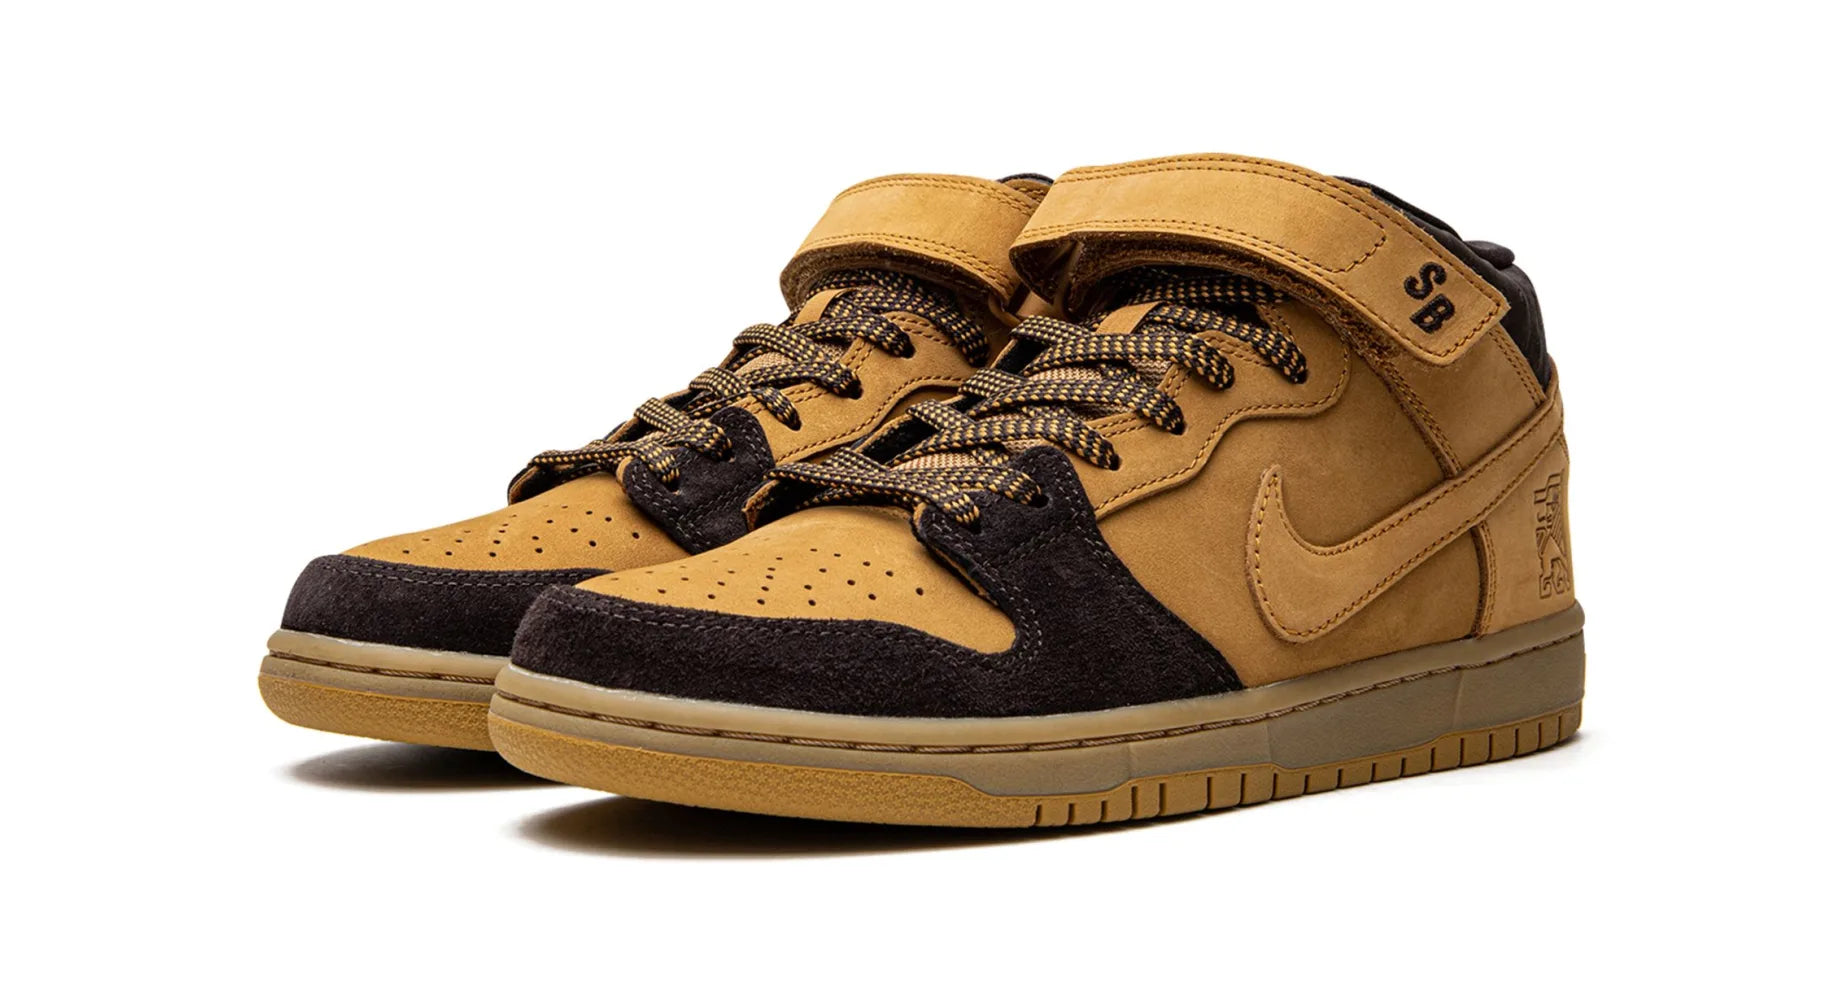 Nike SB Dunk Mid Lewis Marnell